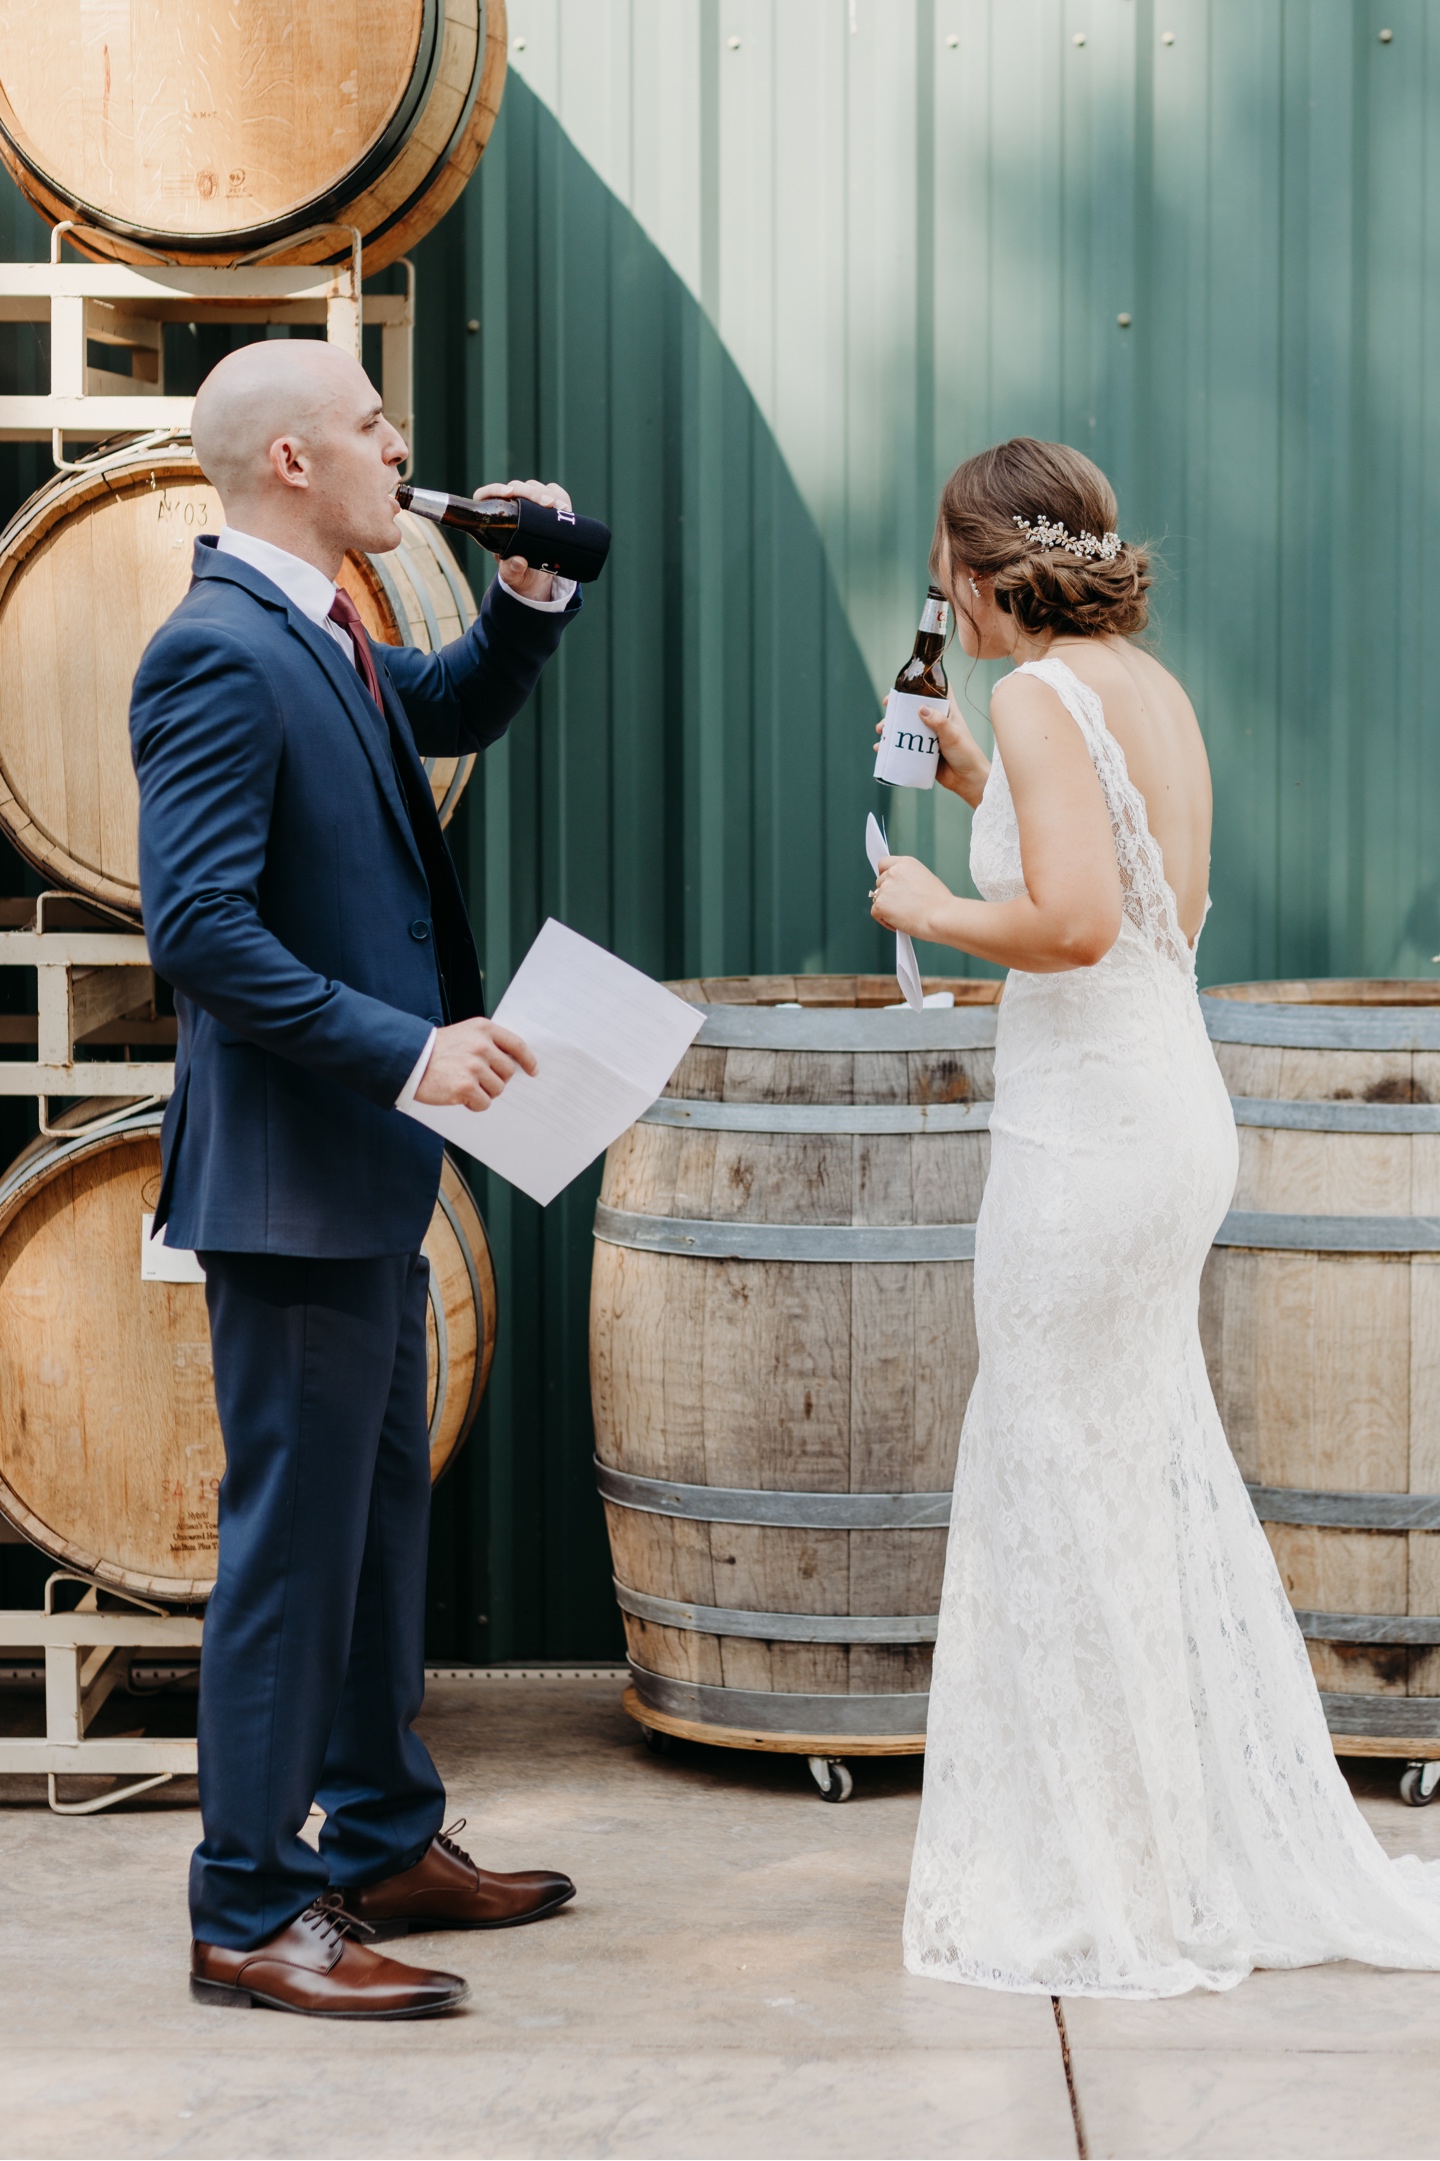 Bride and groom drink a beer after they read their wedding letters to each other. Wedding photography in Sacramento by Liz Koston.